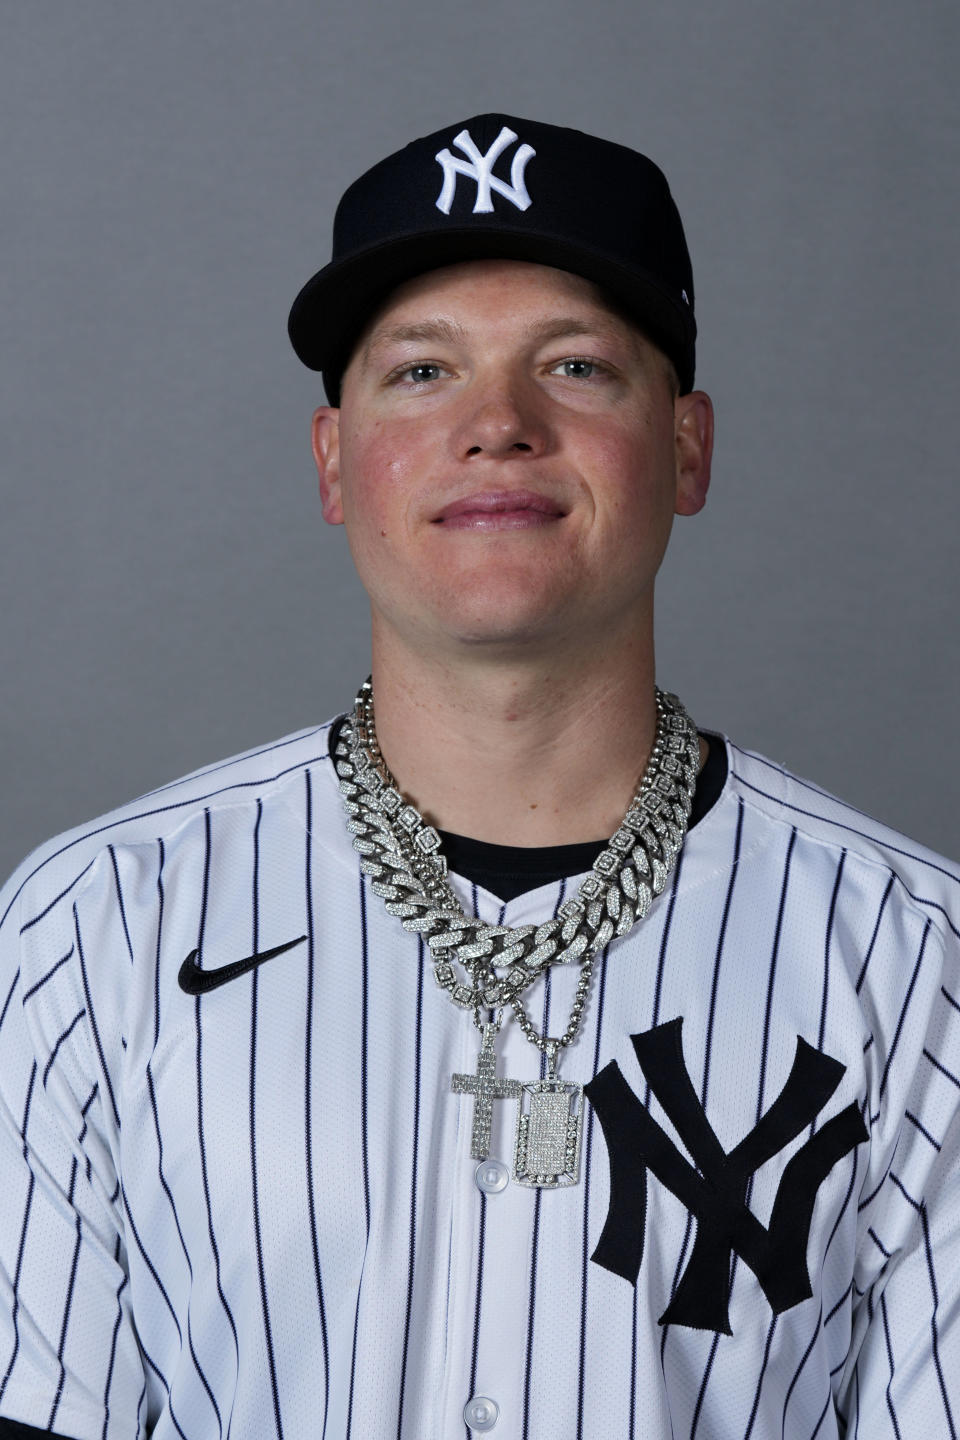 FILE - Alex Verdugo of the New York Yankees baseball team poses Feb. 21, 2024, in Tampa, Fla. During his time with the Boston Red Sox, Alex Verdugo frequently played with several gaudy chains bouncing around his neck. He packs at least six for every road trip, and he's lost count of how many he owns. In his first season with the famously clean-cut New York Yankees, Verdugo has been given an order by manager Aaron Boone: only one chain per game. (AP Photo/Charlie Neibergall, File)